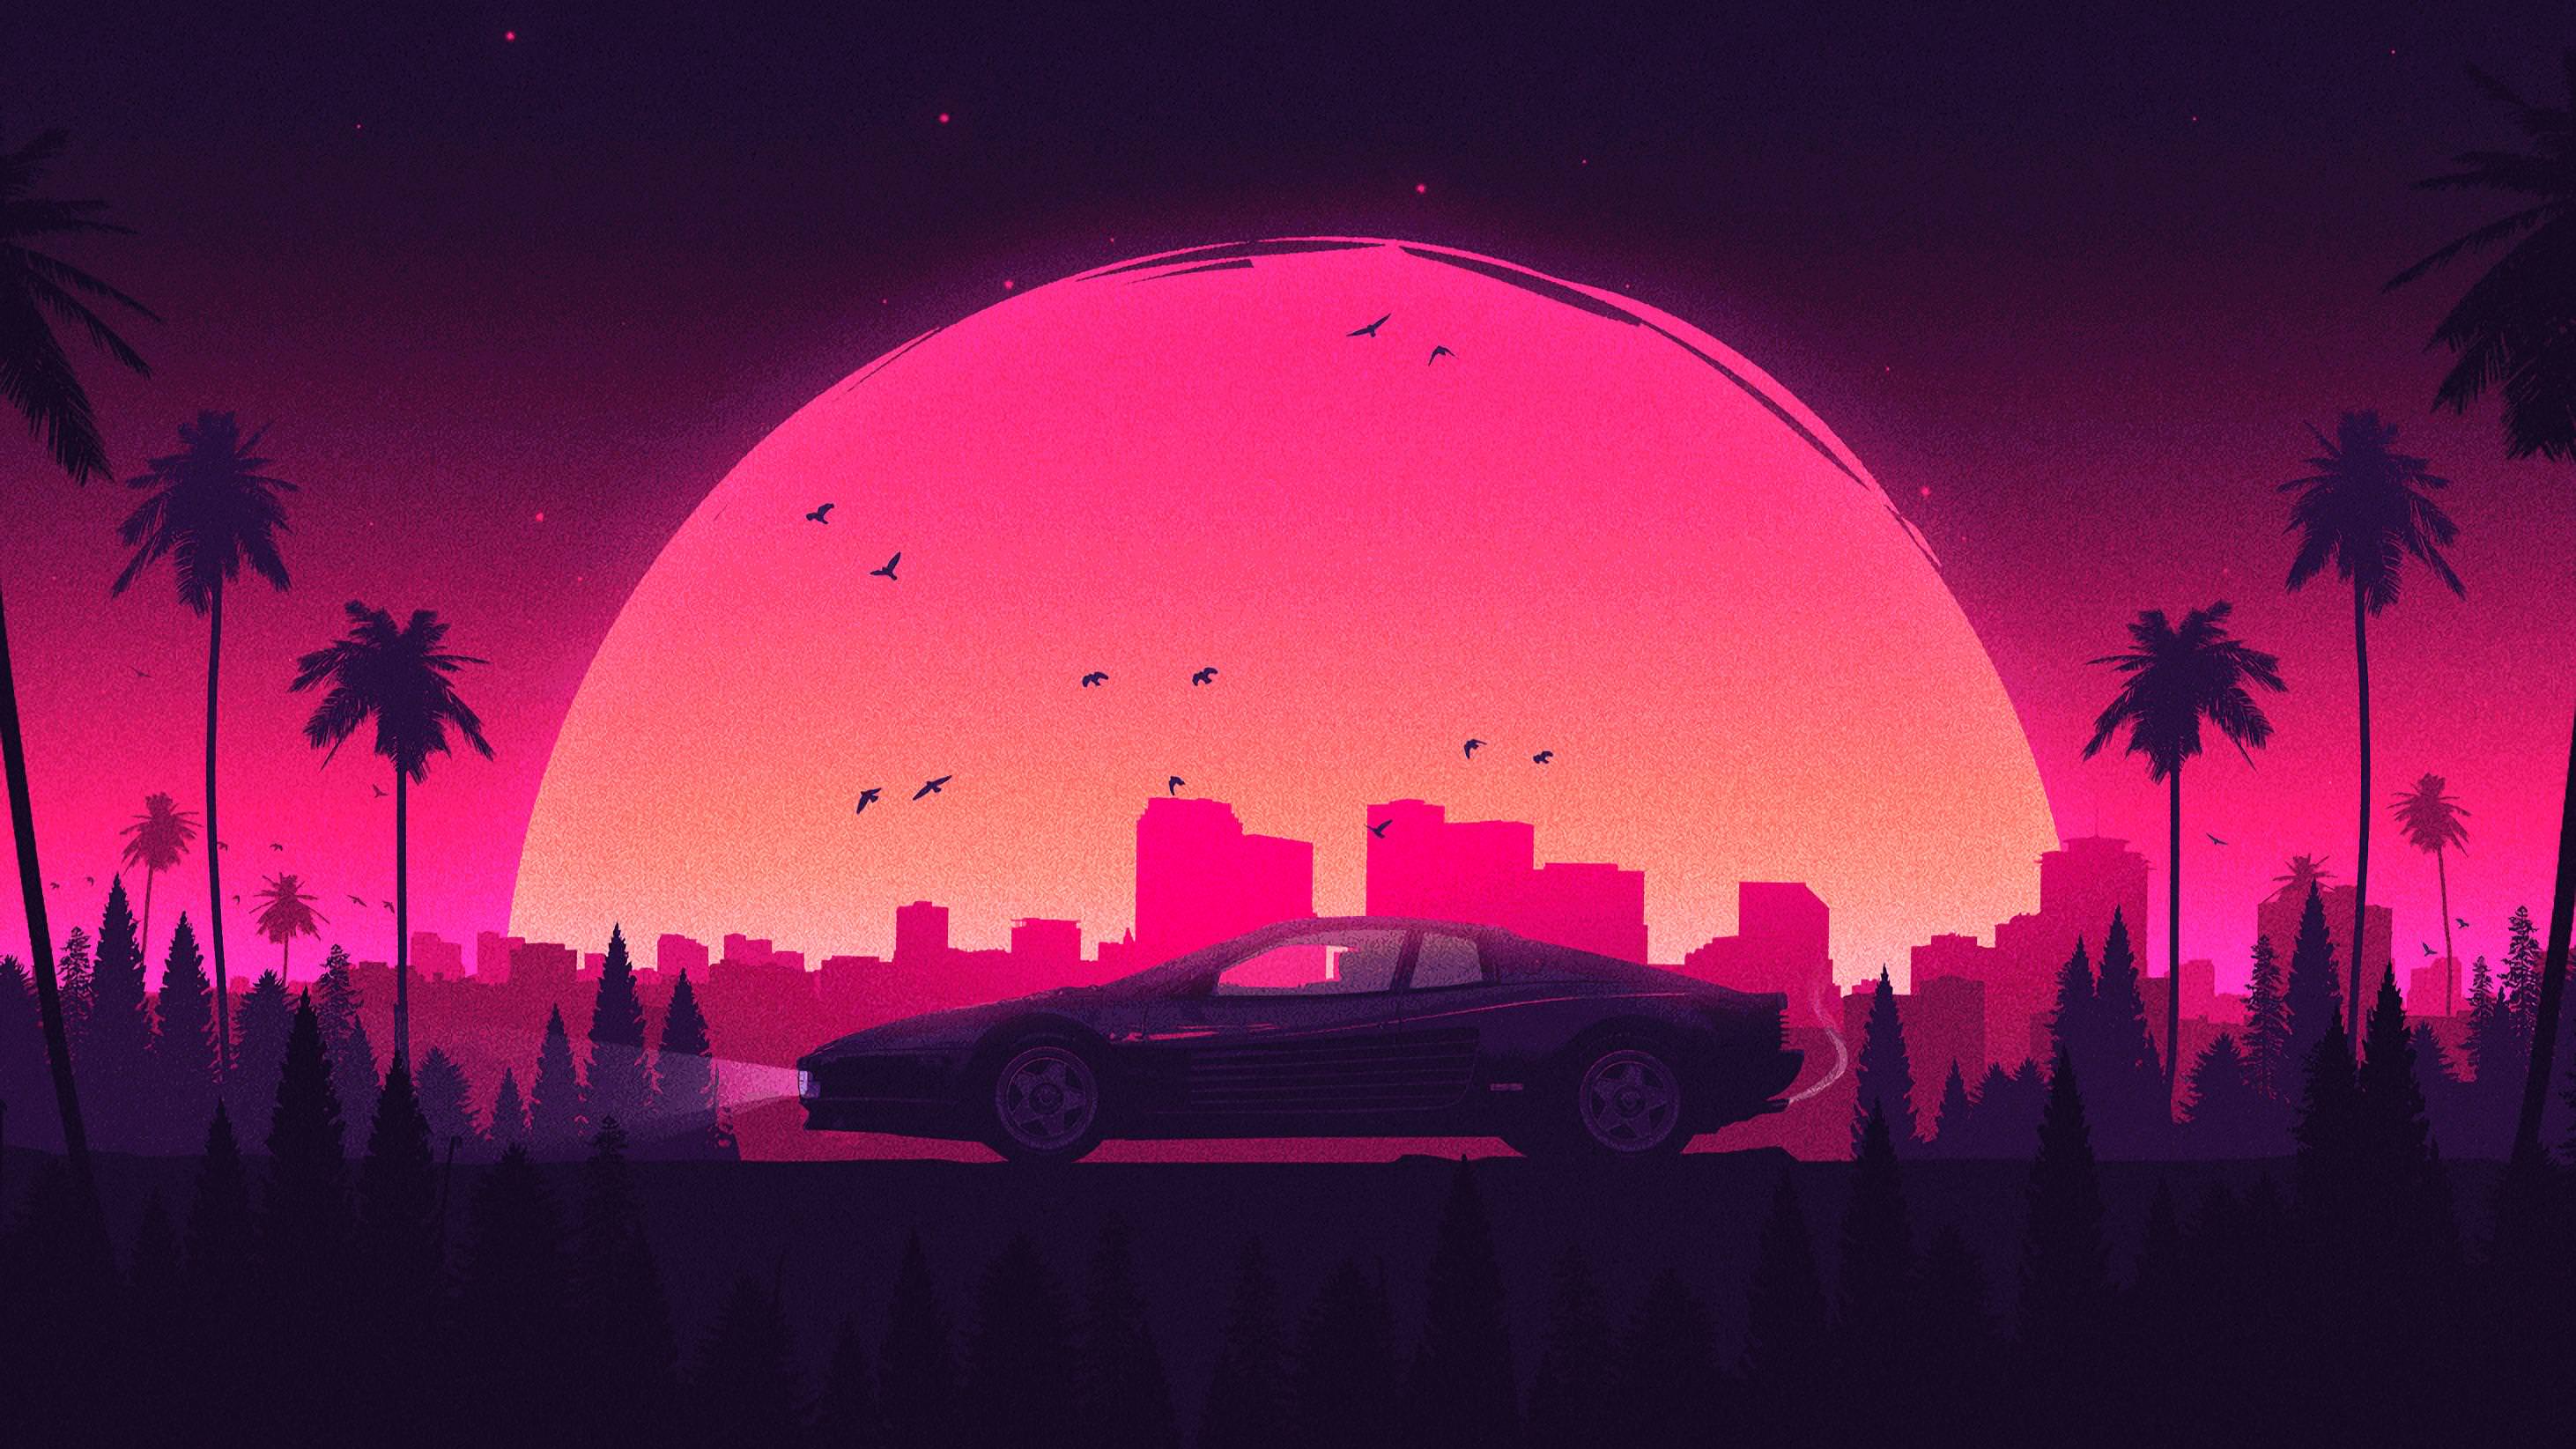 Wallpaper, Retrowave, old car, sunset, palm trees, cityscape, pink, shadow, dark background 2924x1645